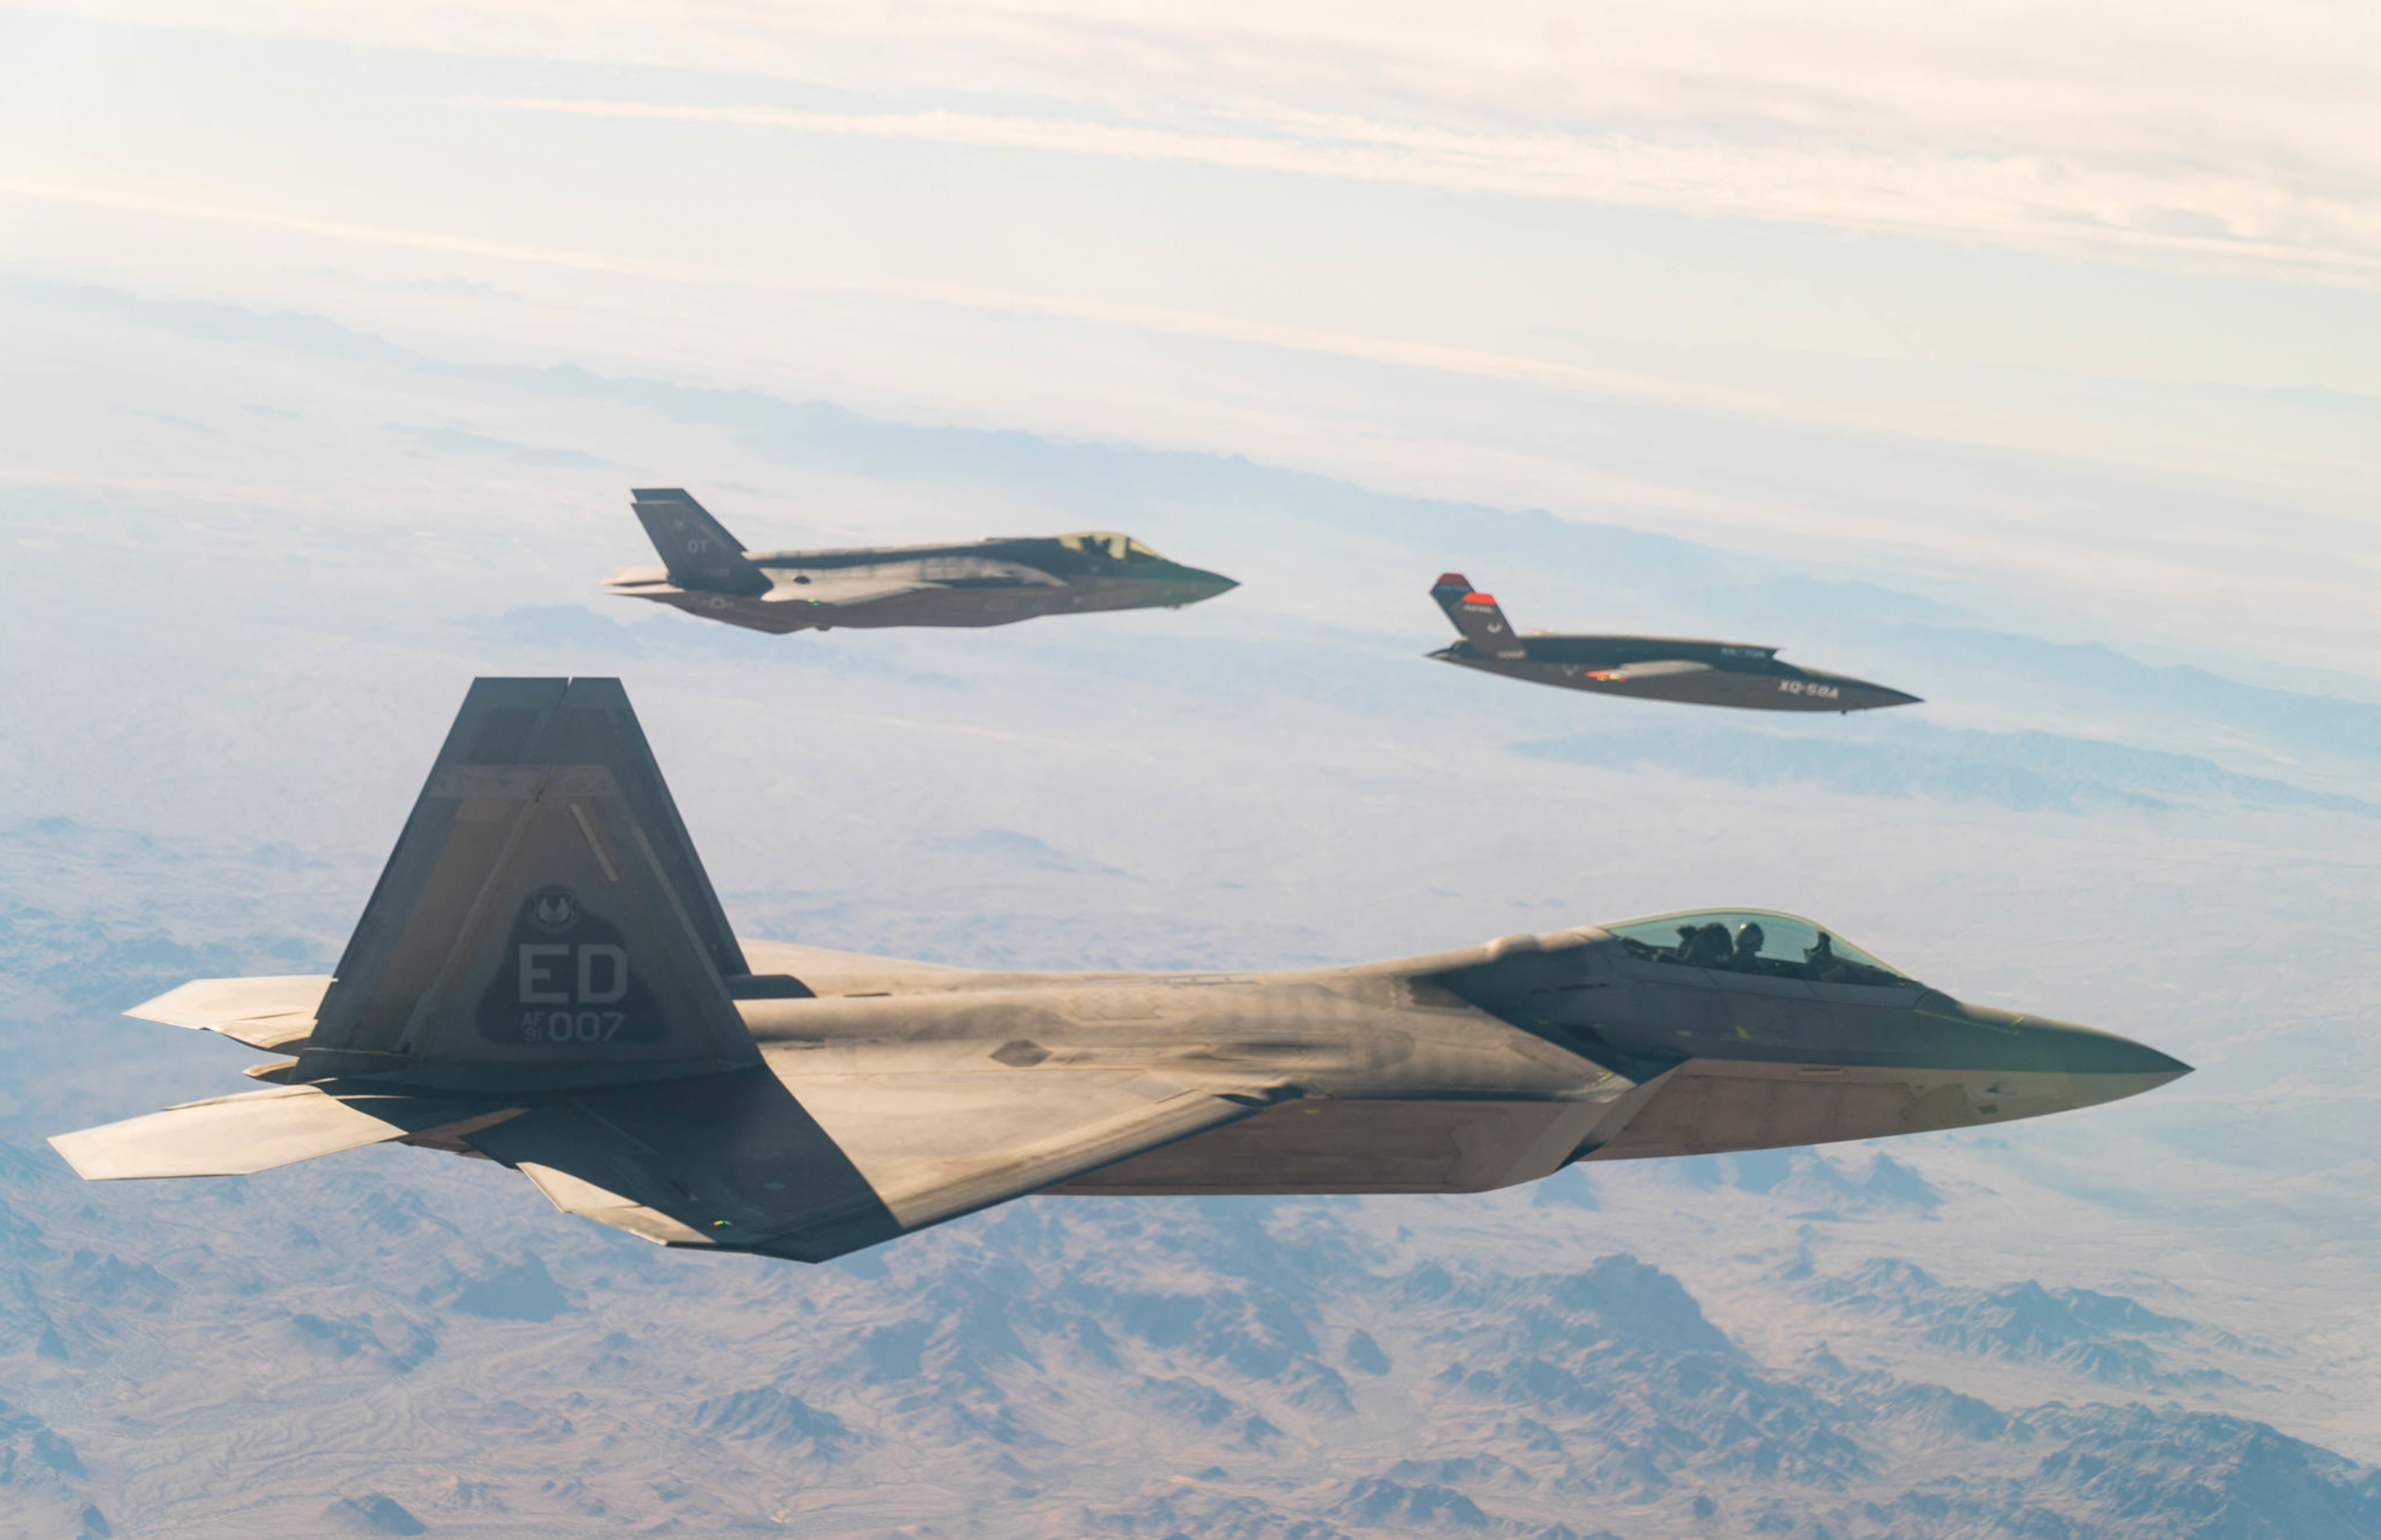 F-22 Raptor networked with an F-35 Joint Strike Fighter via XQ-58 Valkyrie